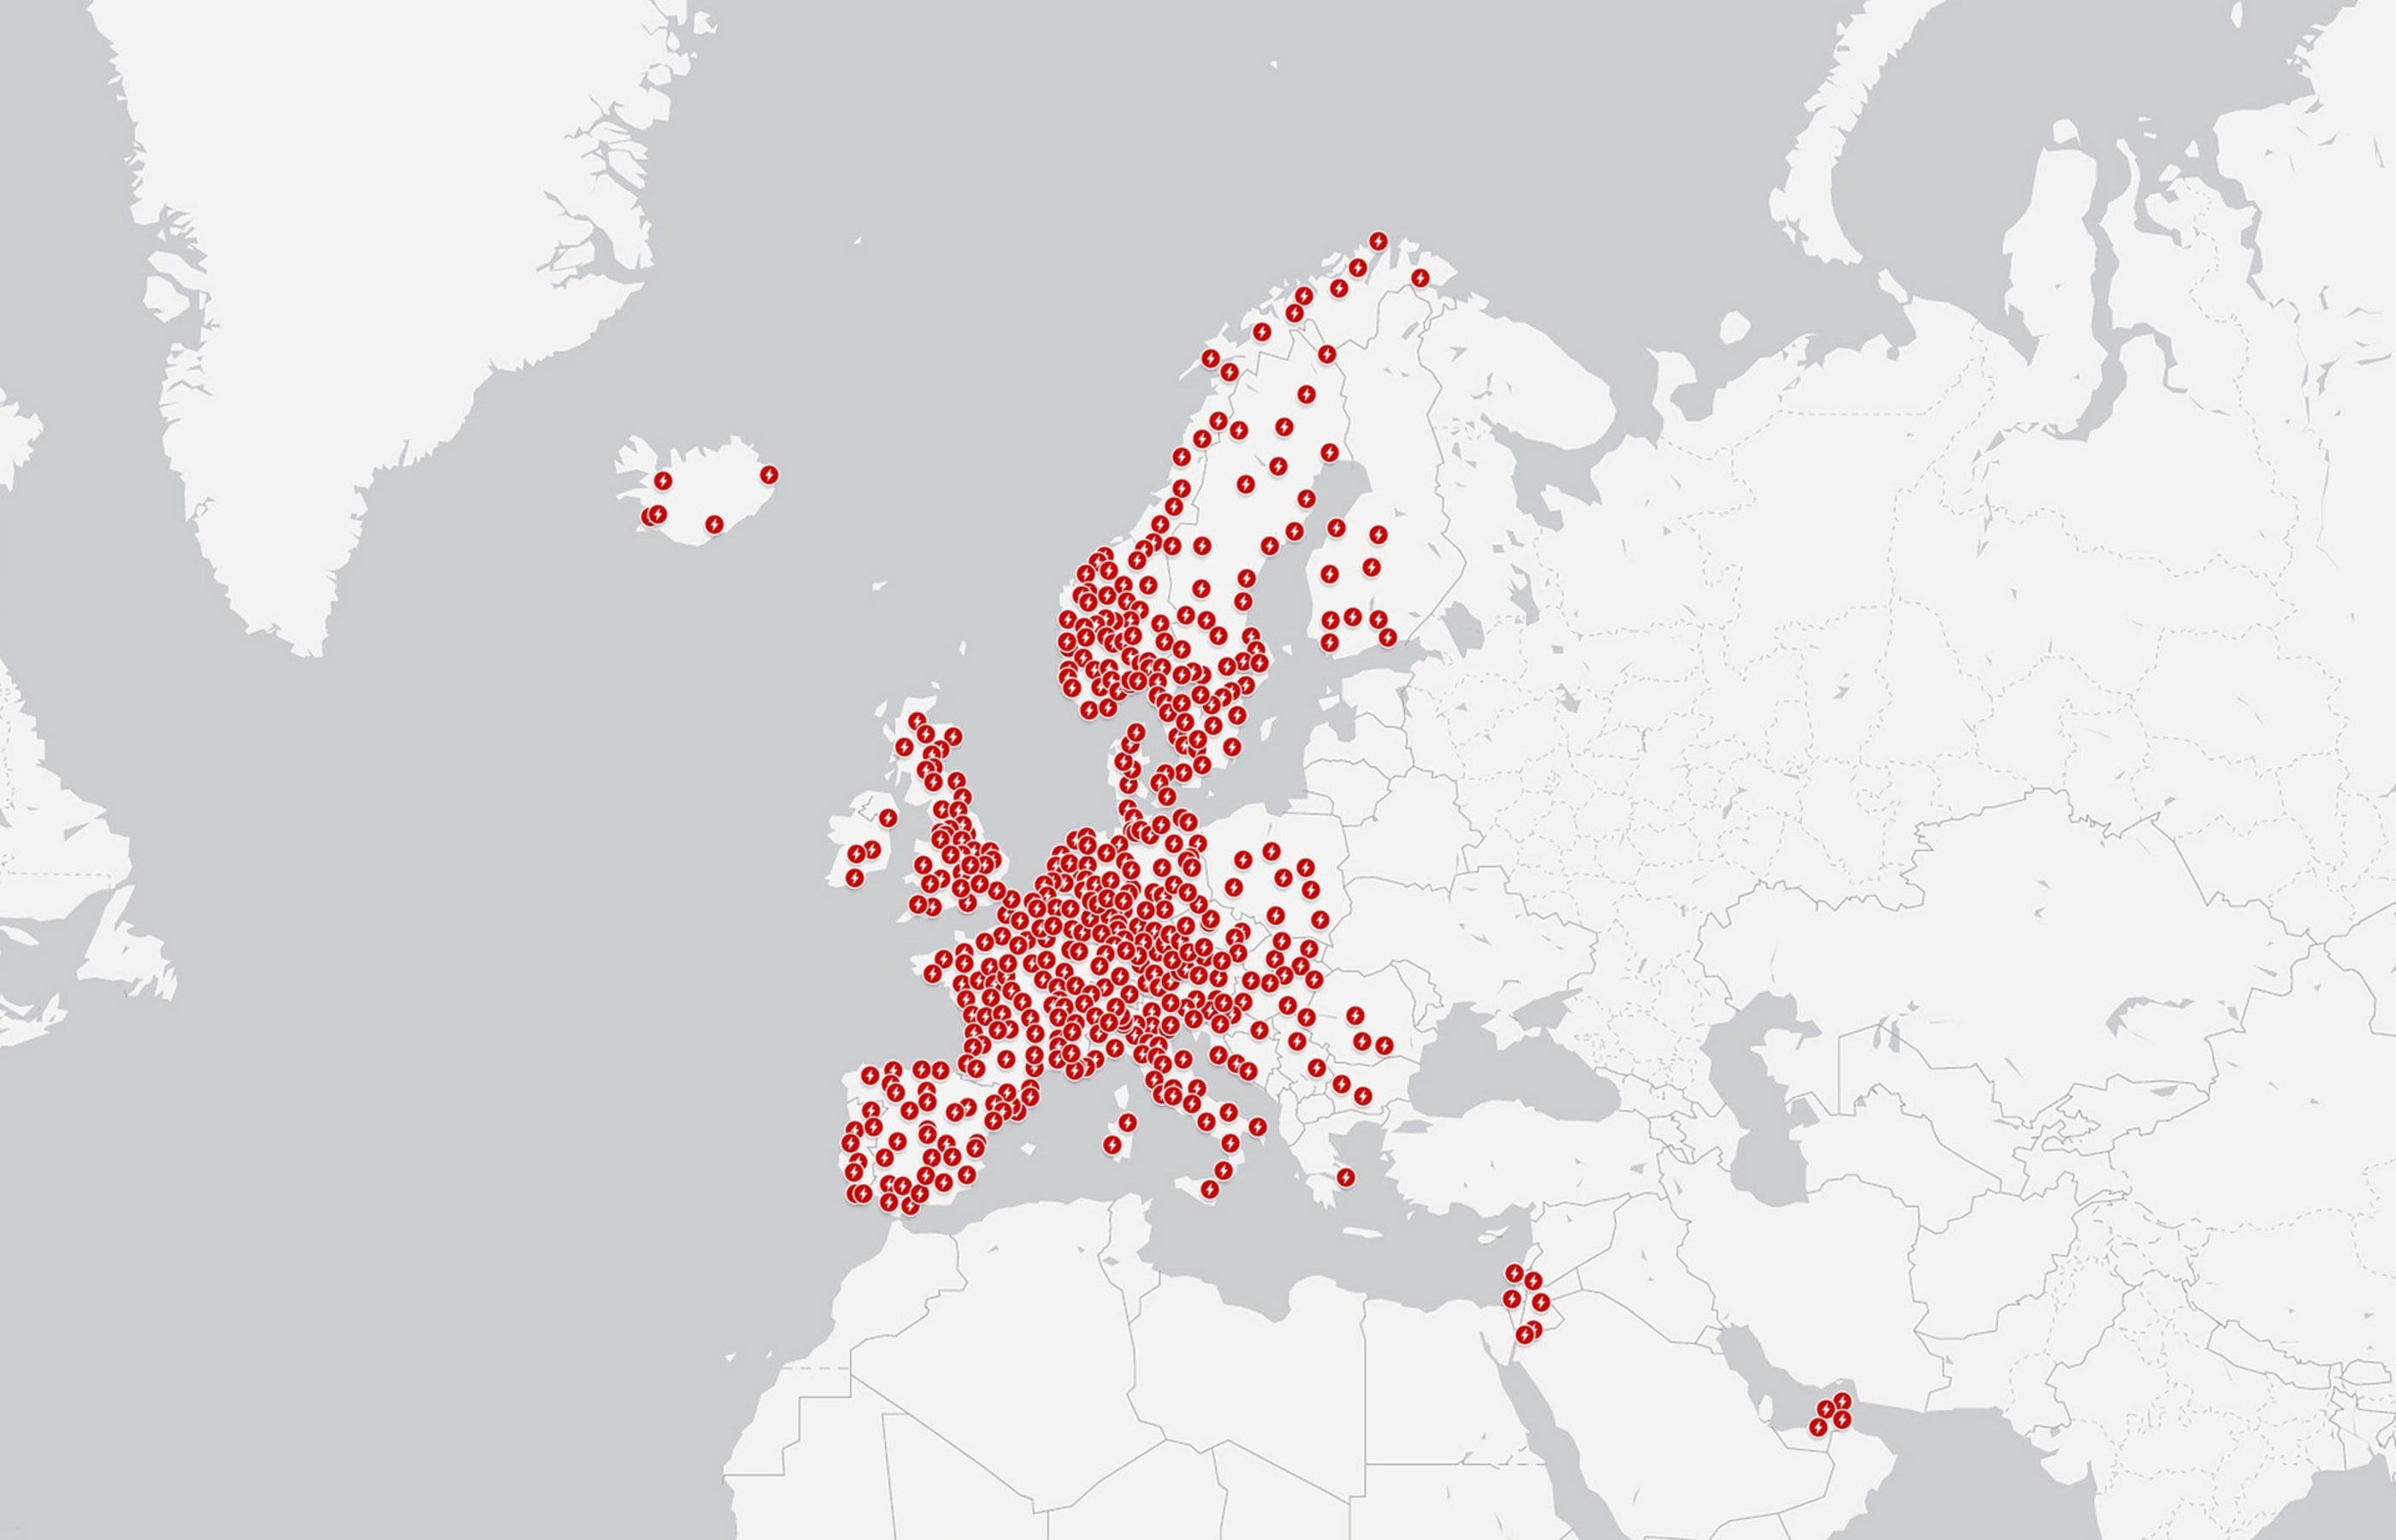 Map of Superchargers in Europe and Middle East